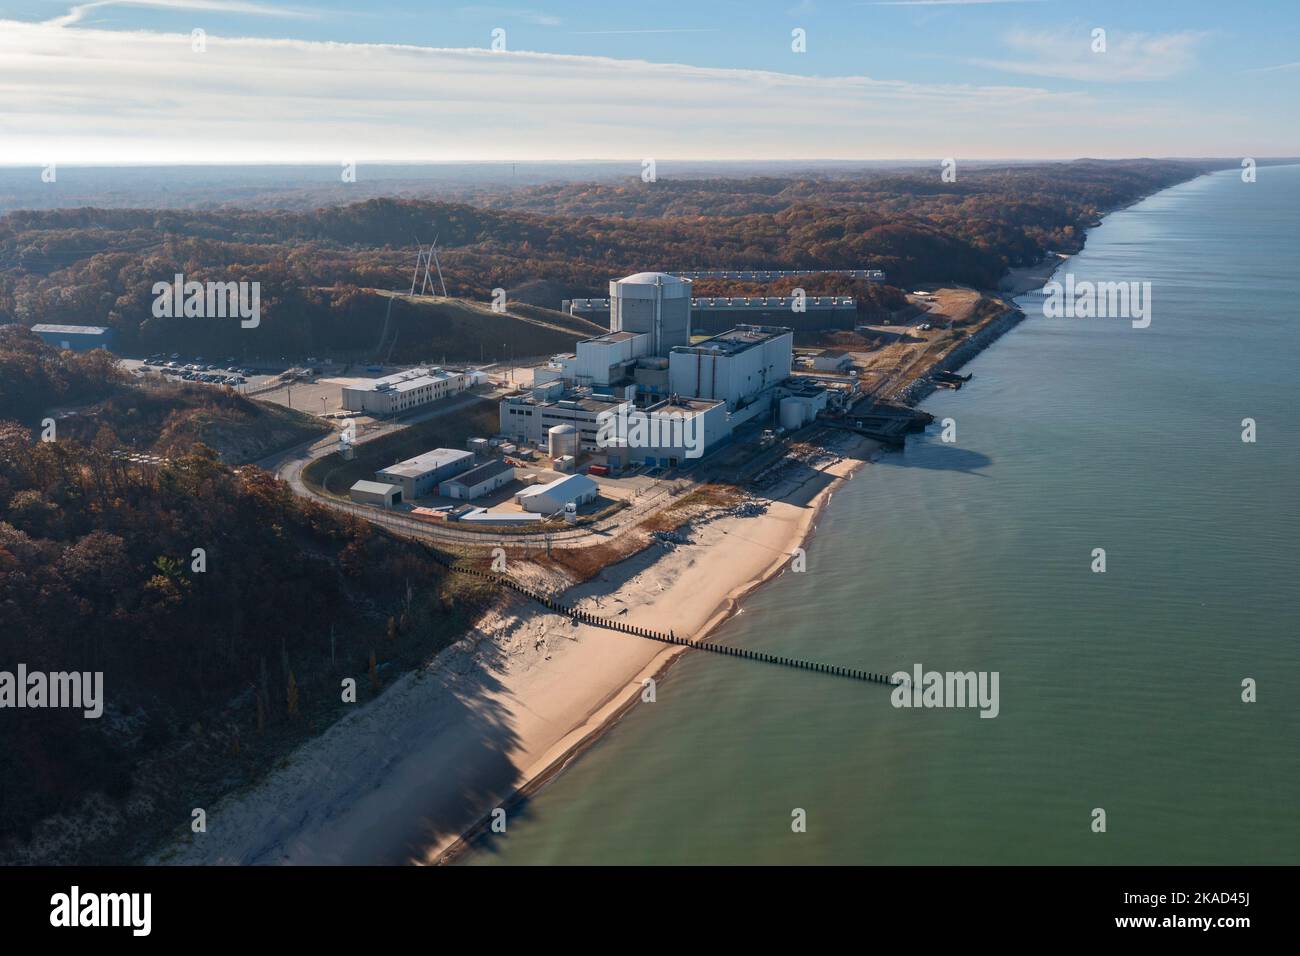 South Haven, Michigan - The Palisades nuclear power plant on the shore of Lake Michigan. The reactor was shut down for decommissioning in May 2022. Bu Stock Photo